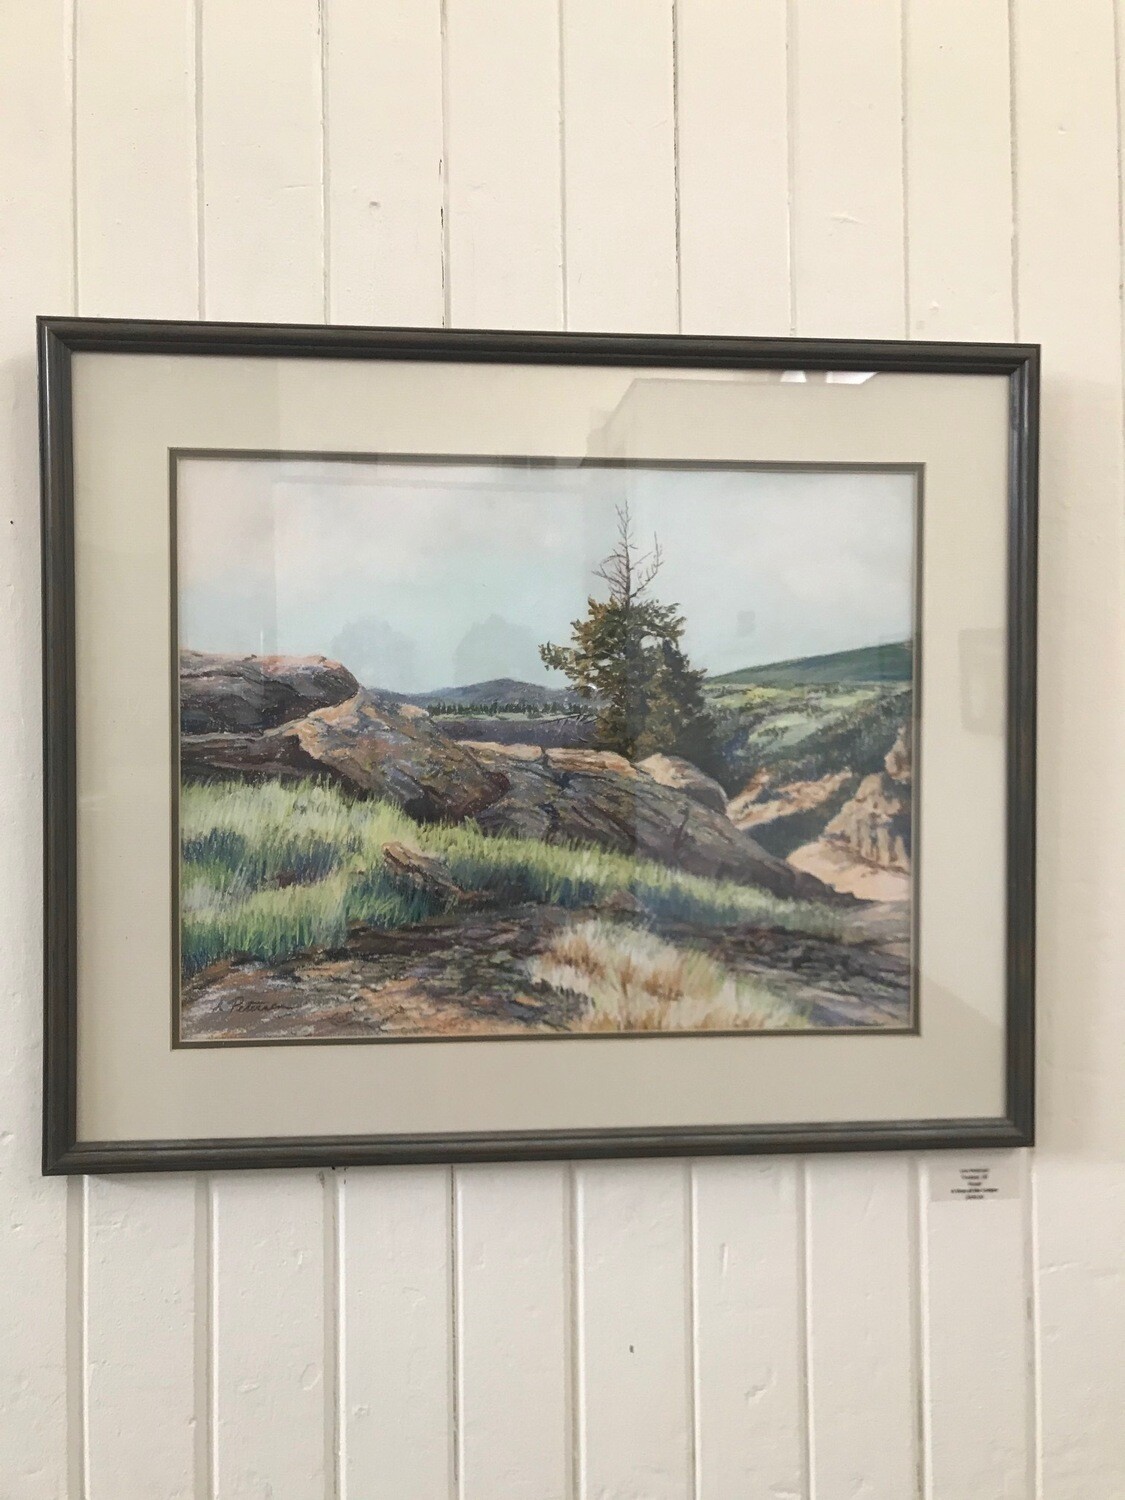 A View of the Canyon by Lois Petersen